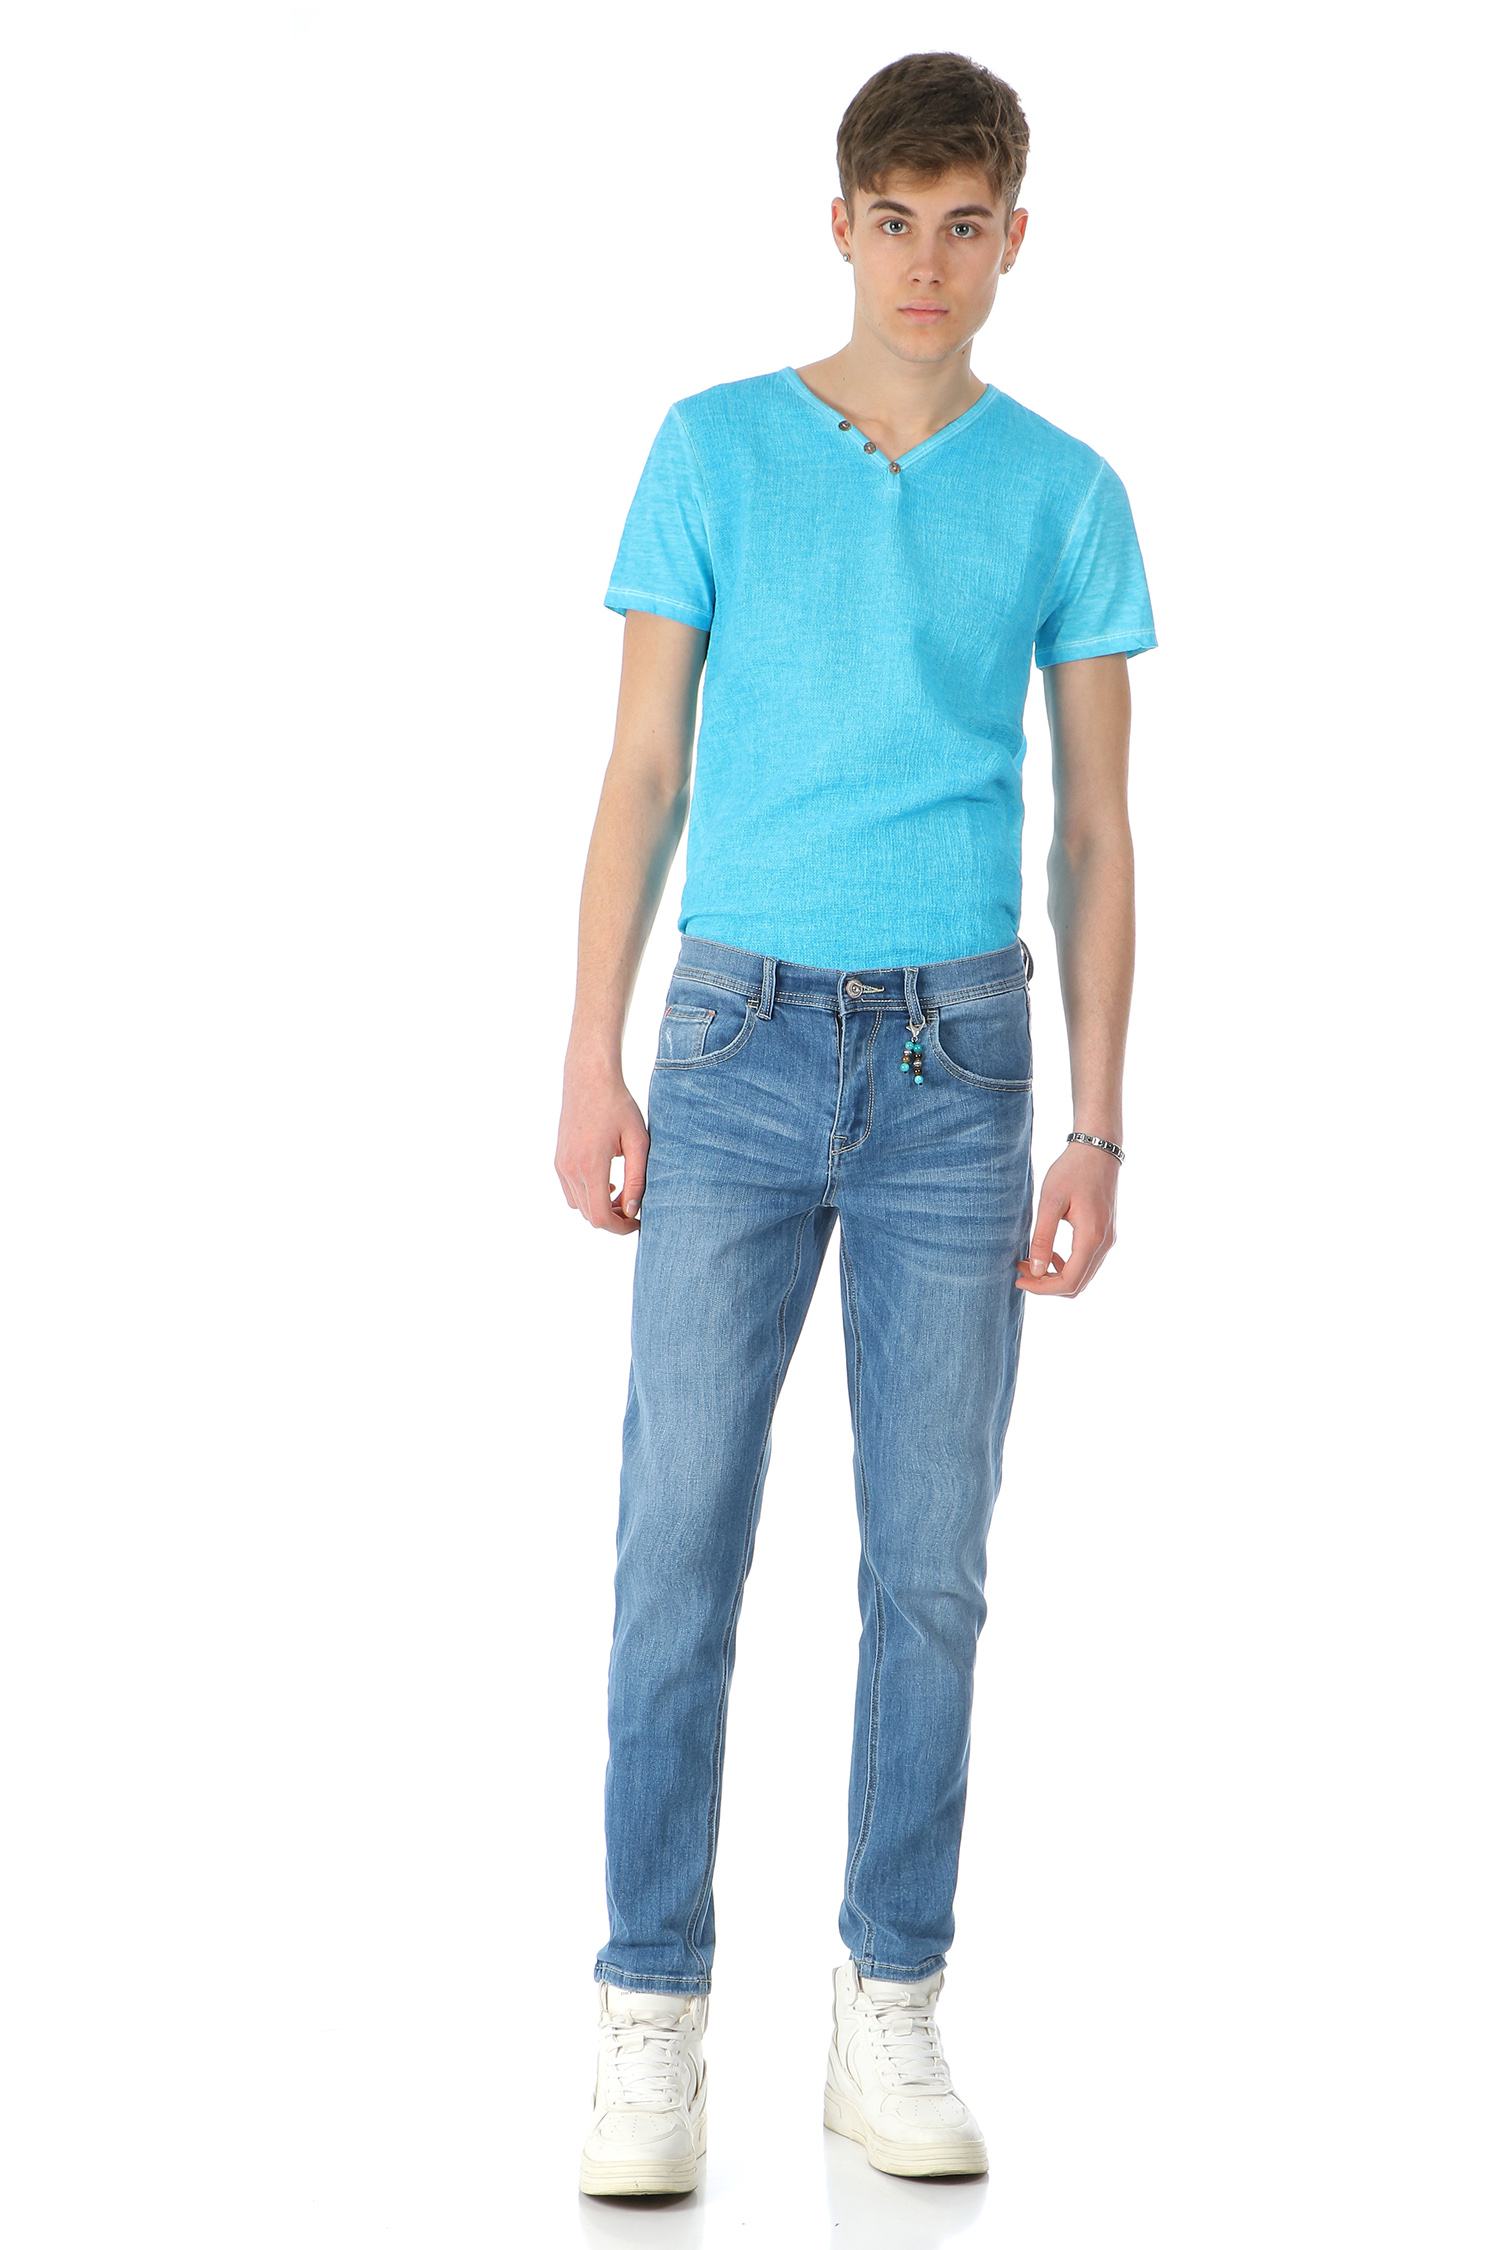 OASIS_JEANS_P2_main